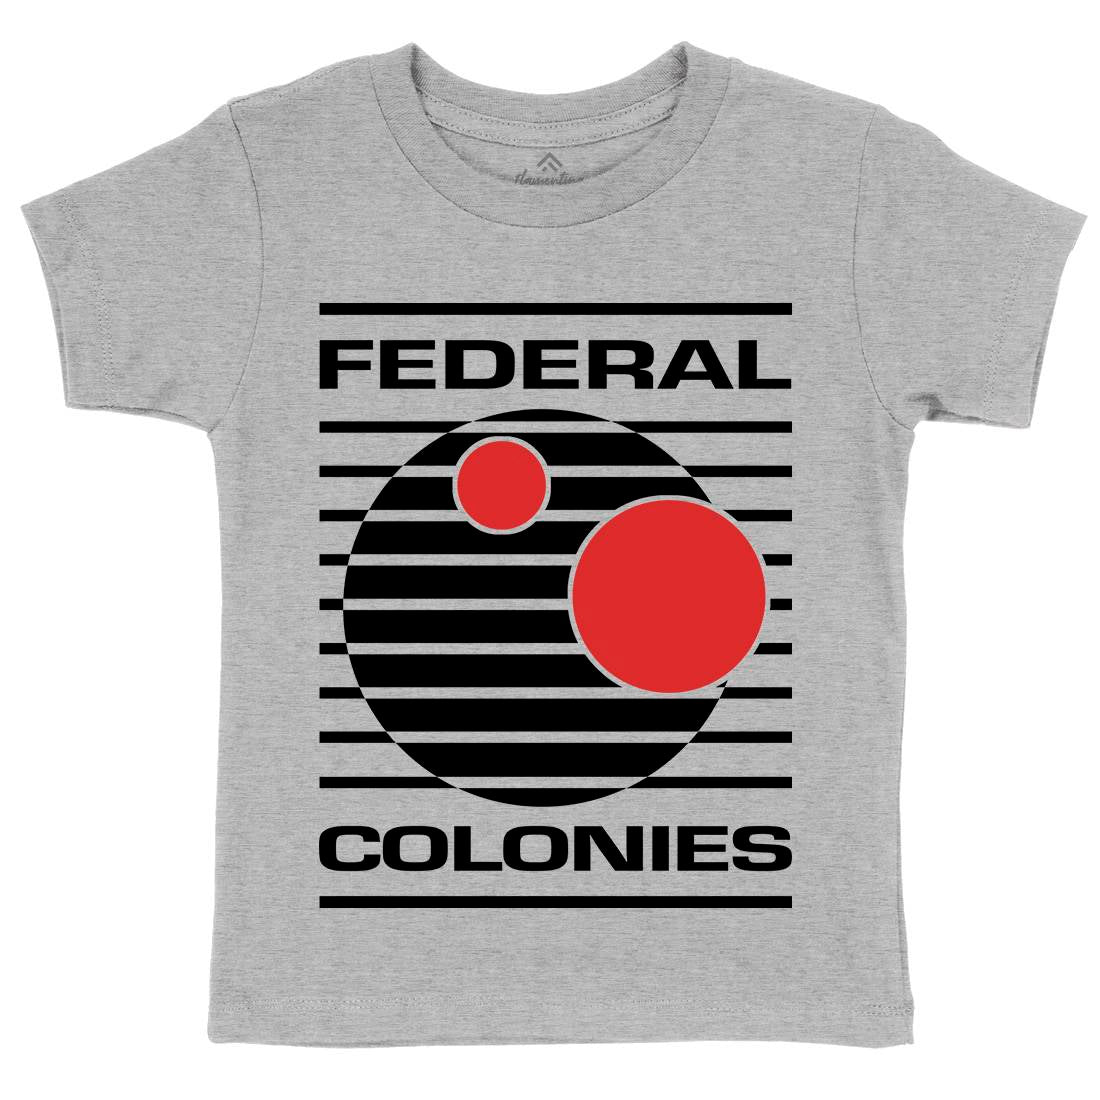 Federal Colonies Kids Organic Crew Neck T-Shirt Space D409